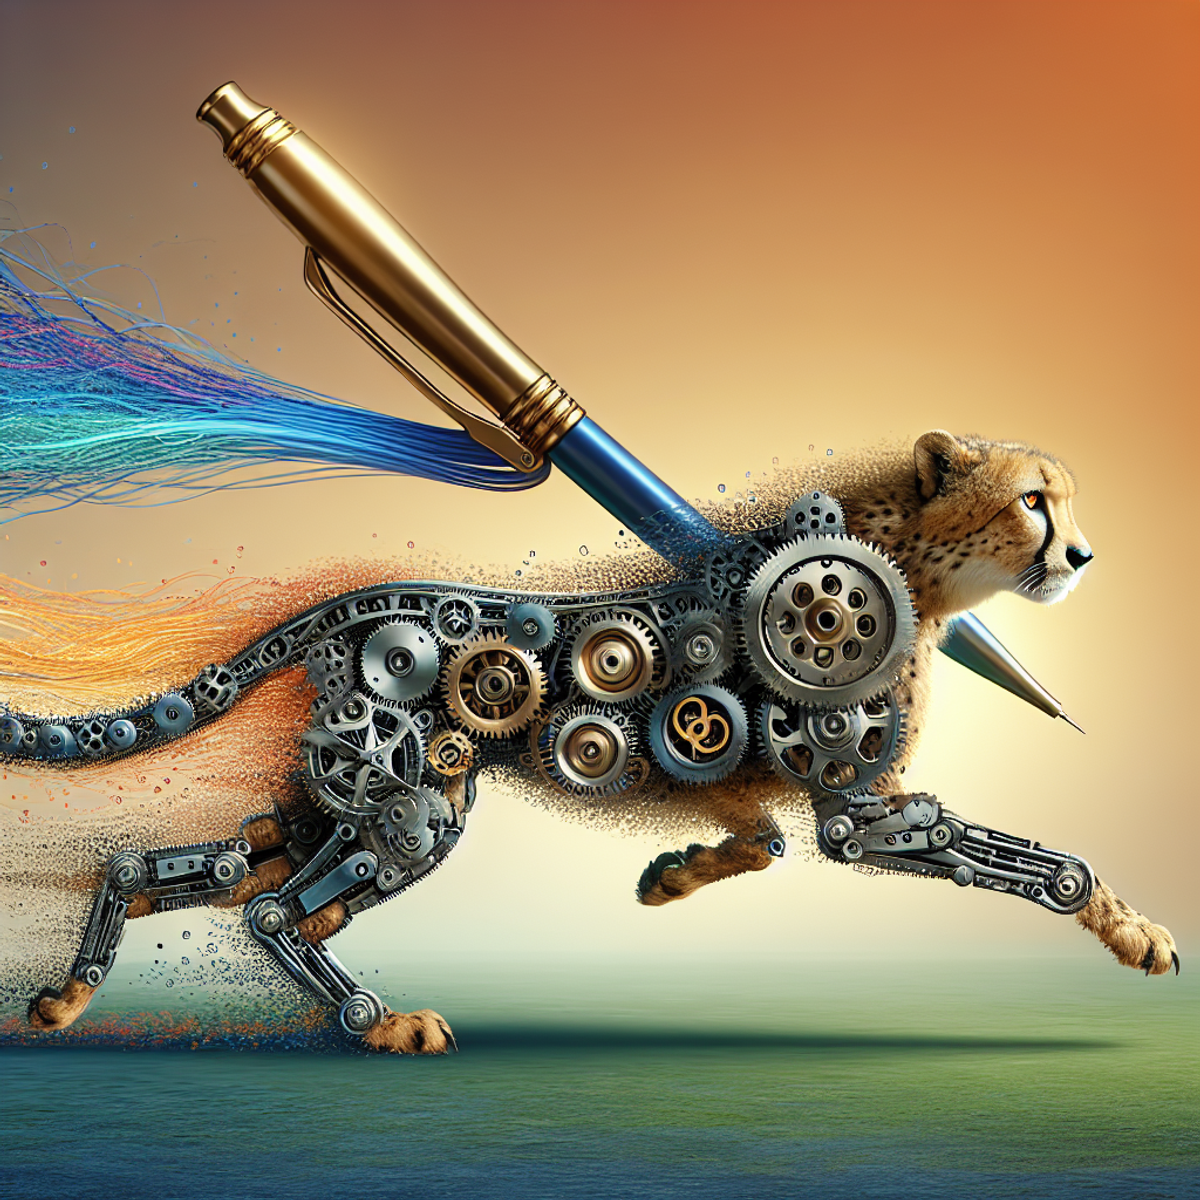 A mechanical cheetah running with a golden key on its back, leaving a colorful trail.